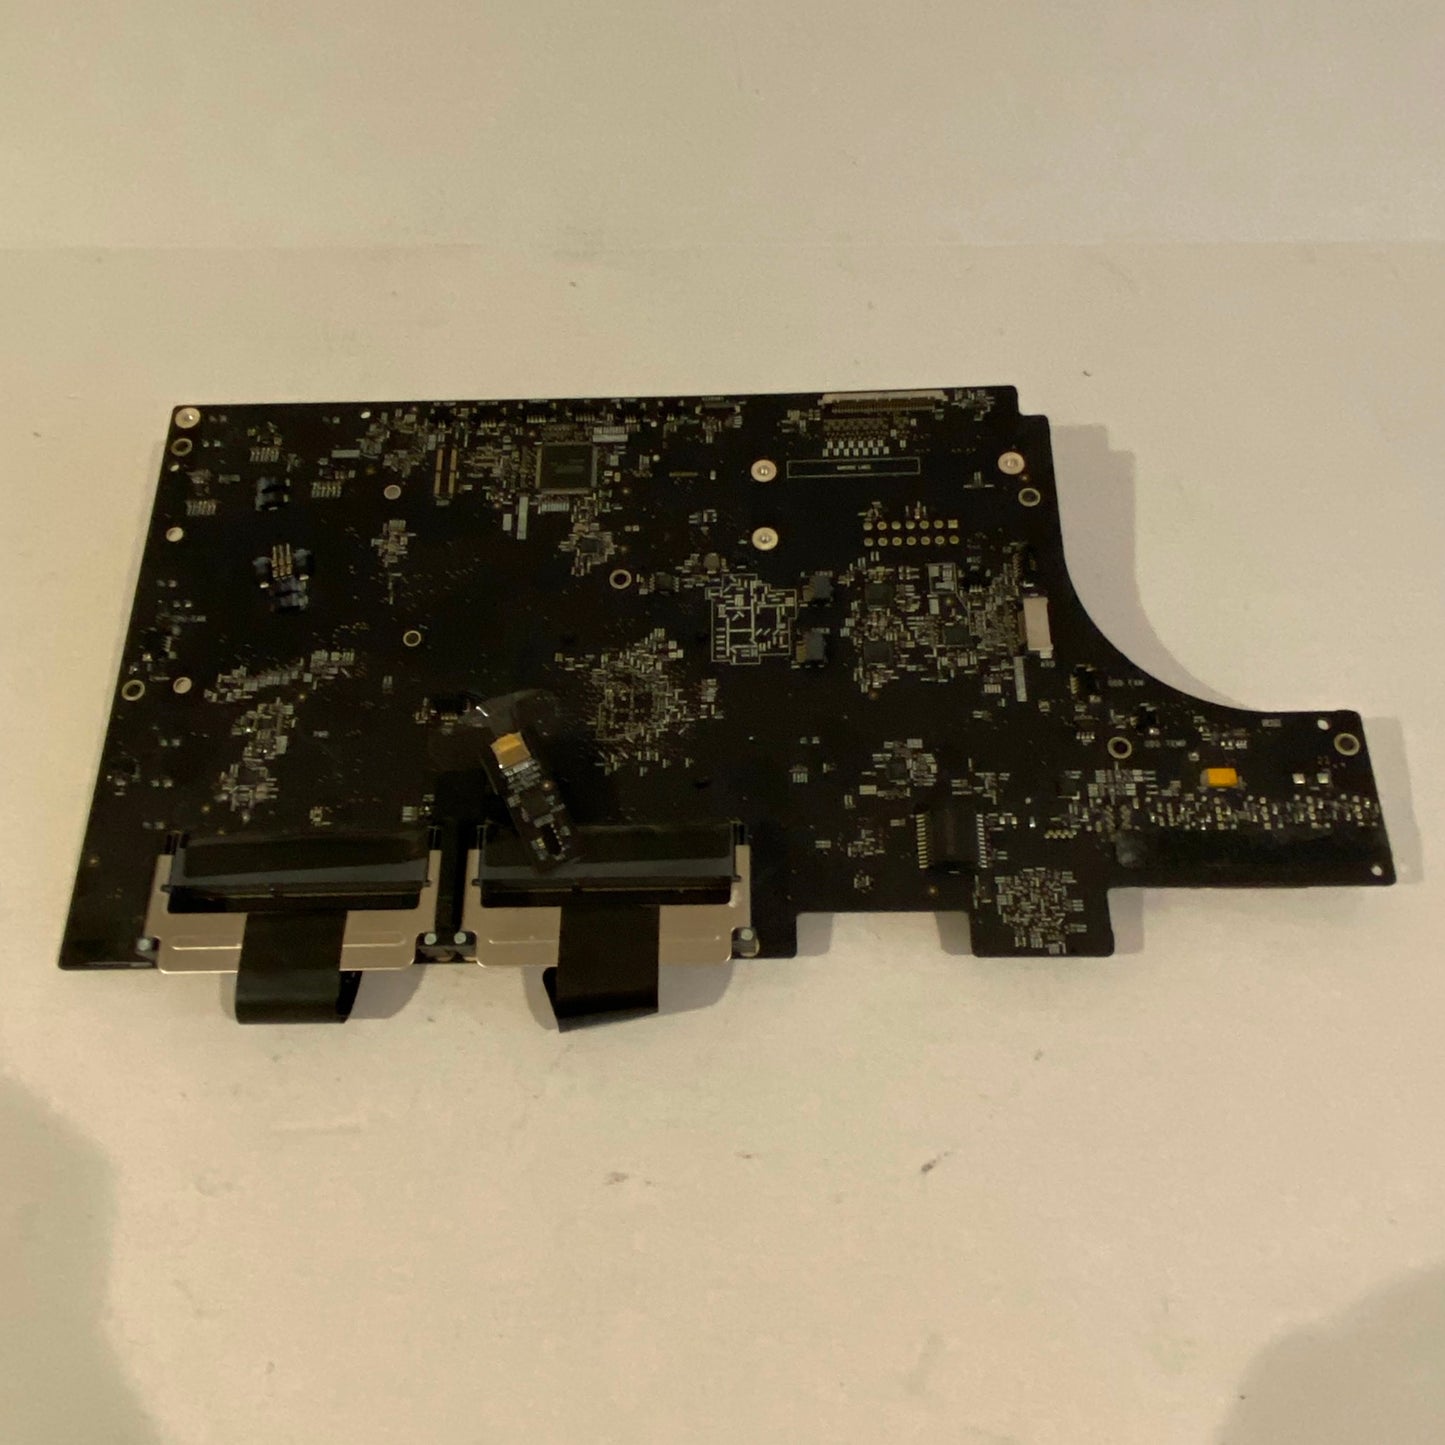 2009 27" iMac 3.06 Ghz Logic Board with CPU and Heat Sink